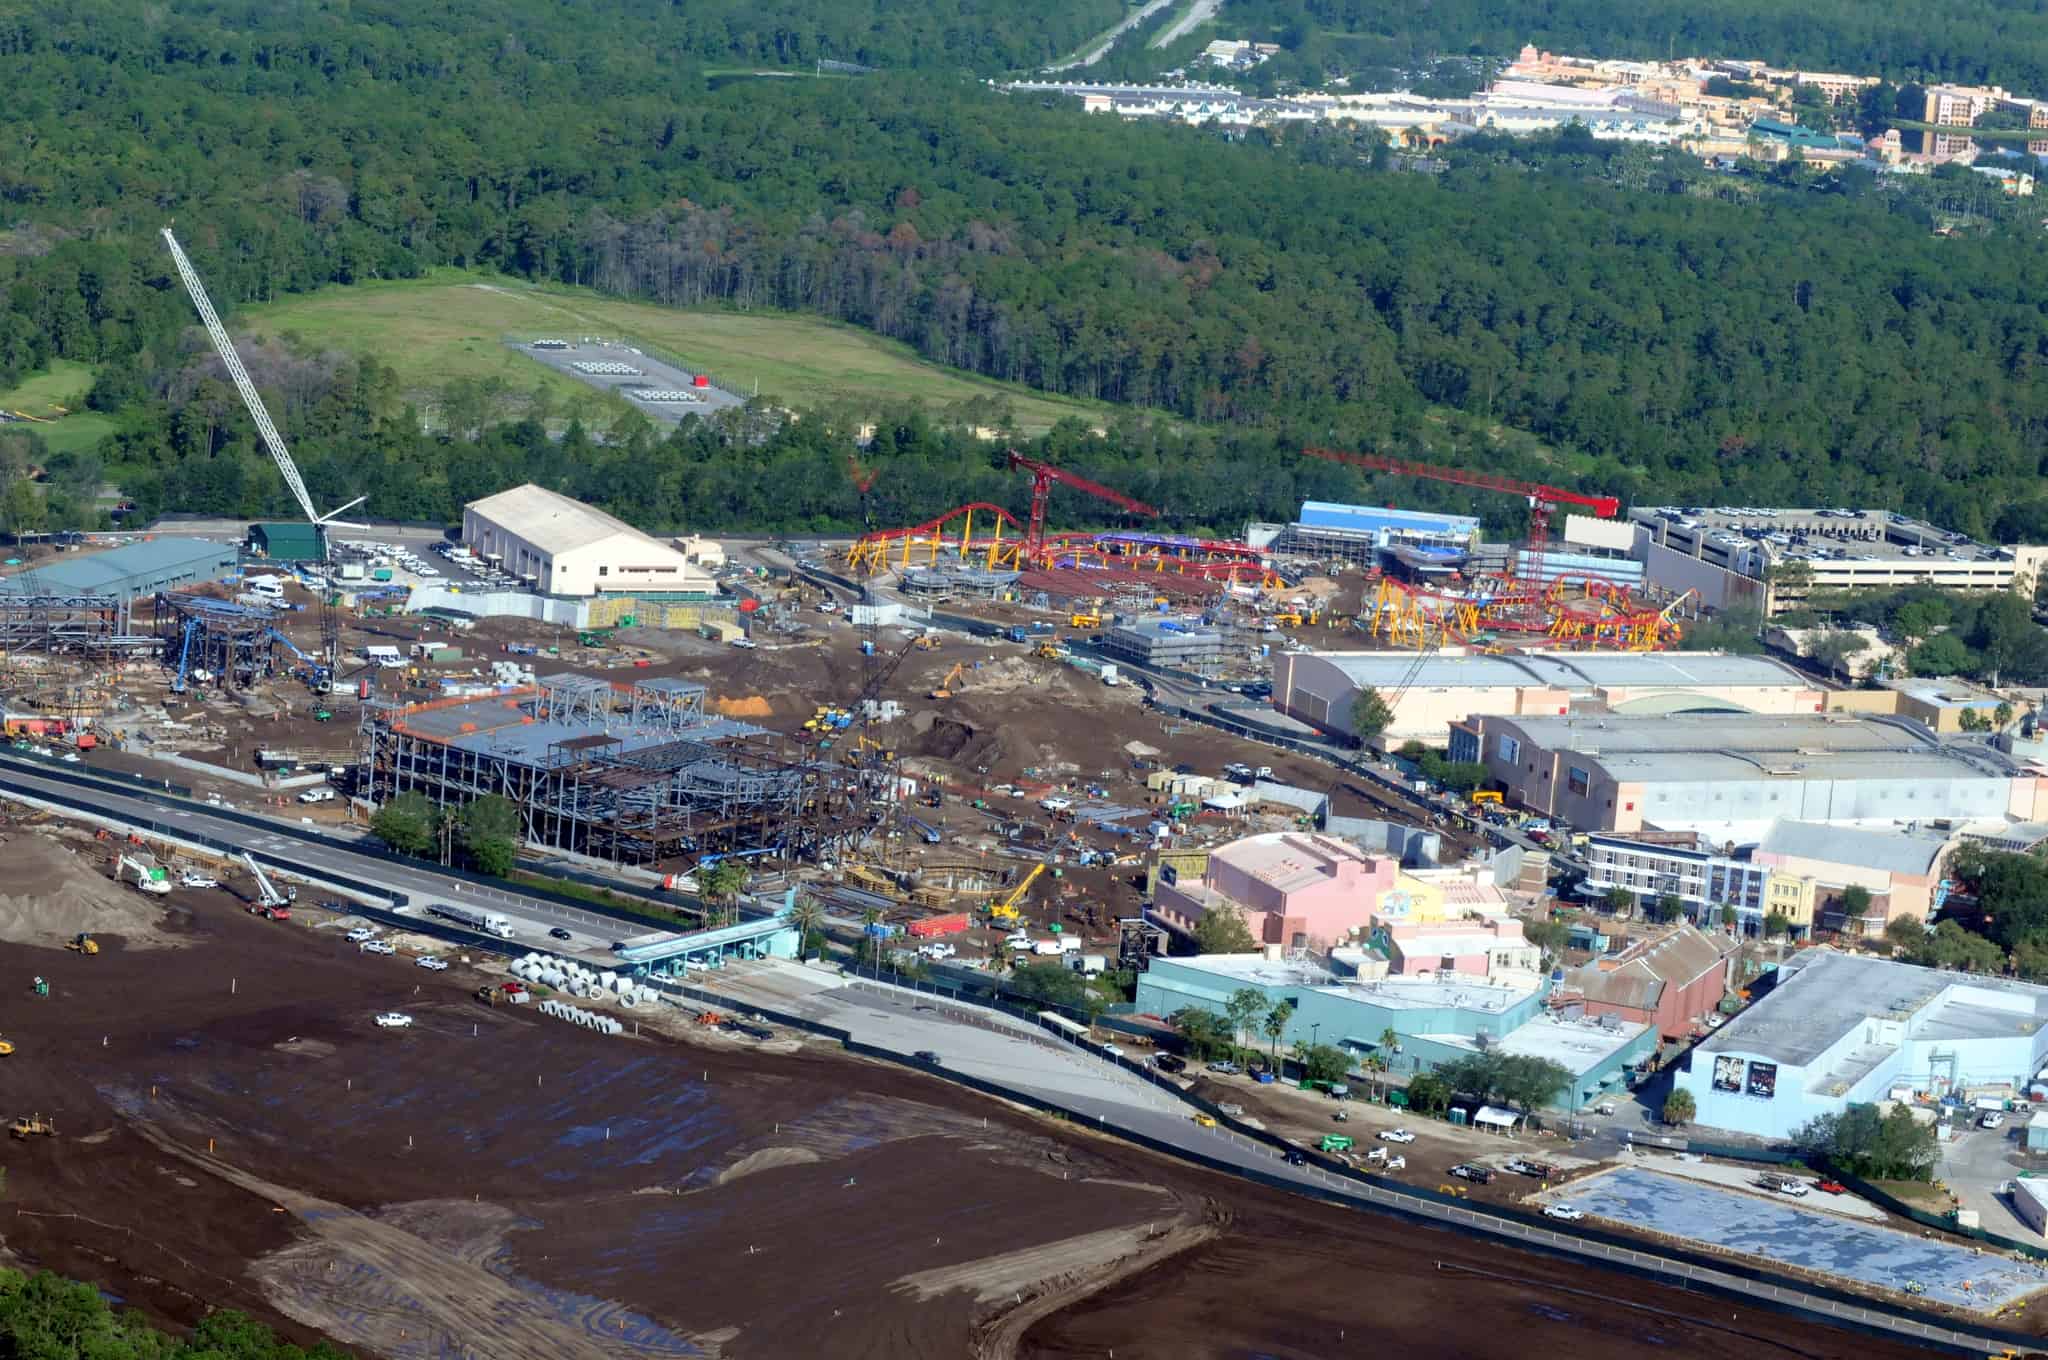 PHOTOS, VIDEO: Aerial View of Star Wars & Toy Story Land ...